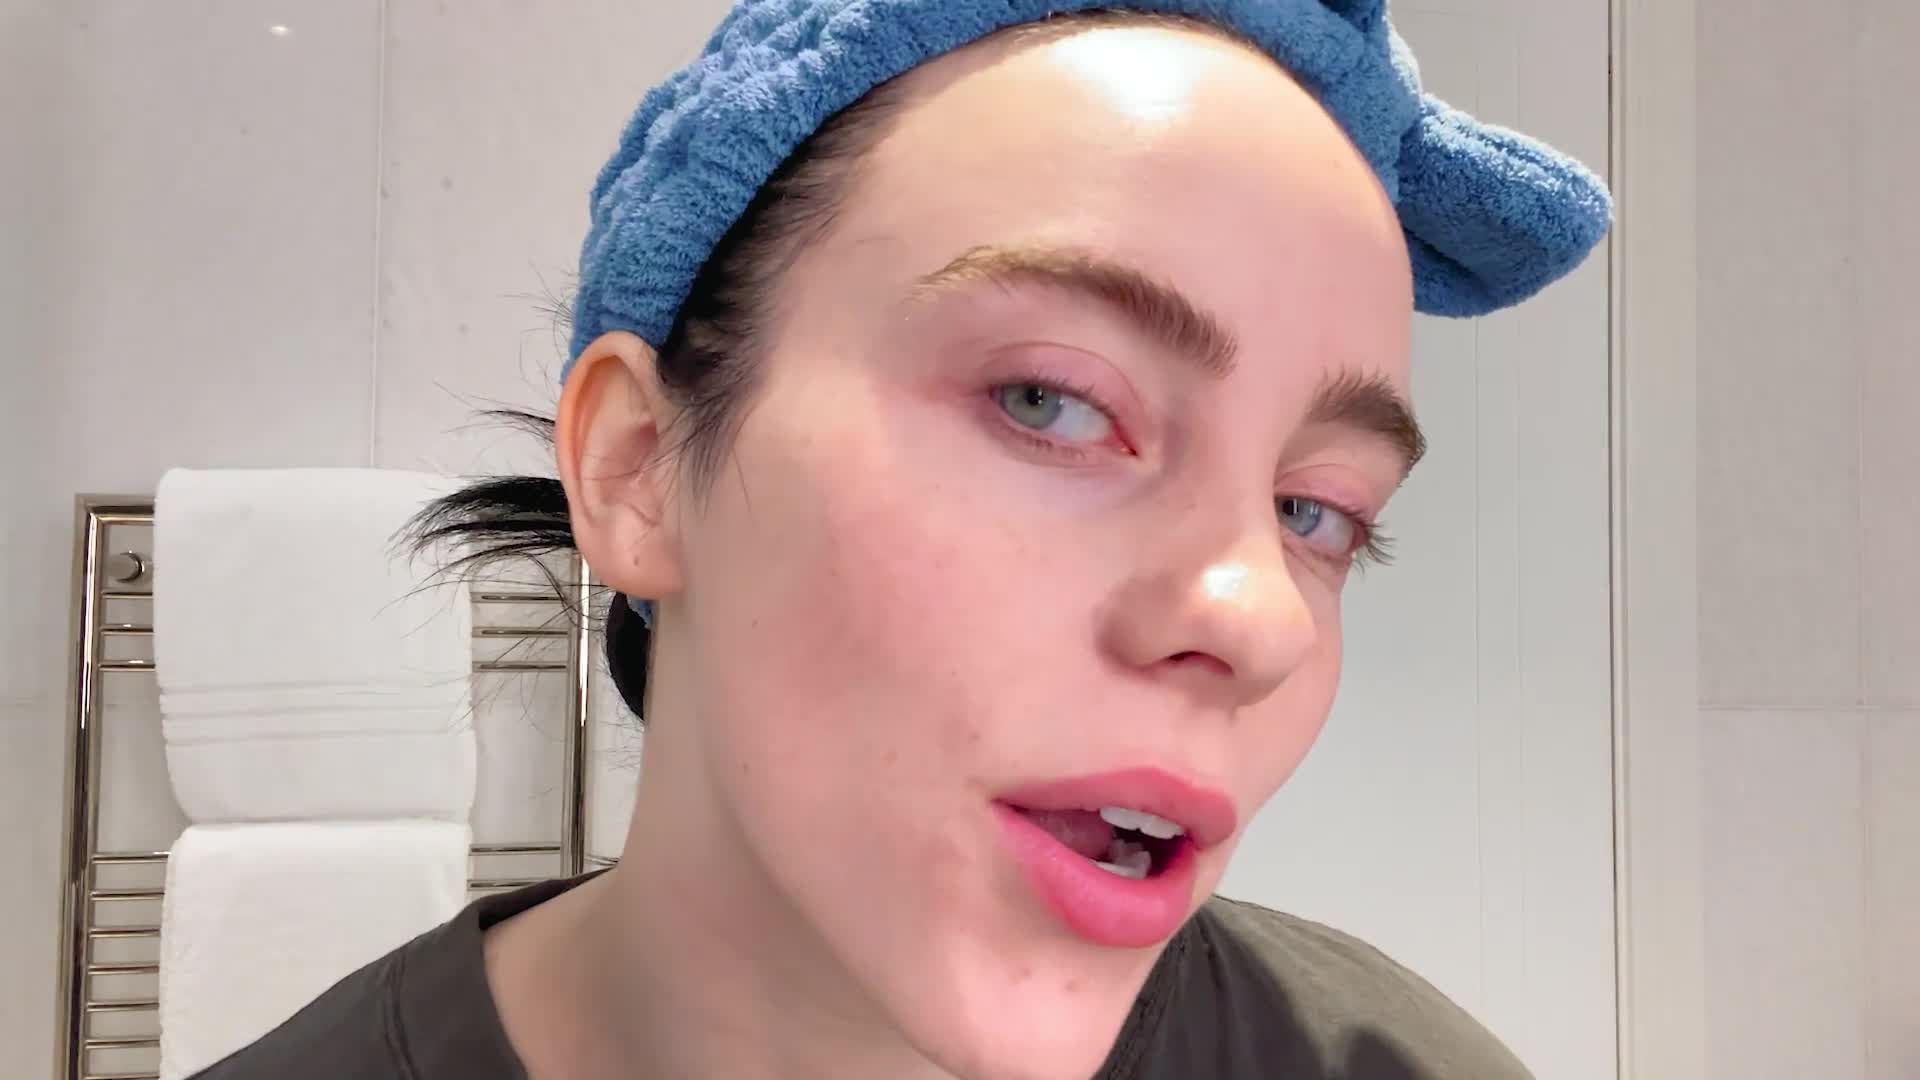 Billie Eilish Shares Her Post-Show Beauty From Makeup Removal to Overnight Hair Beauty Secrets | Vogue